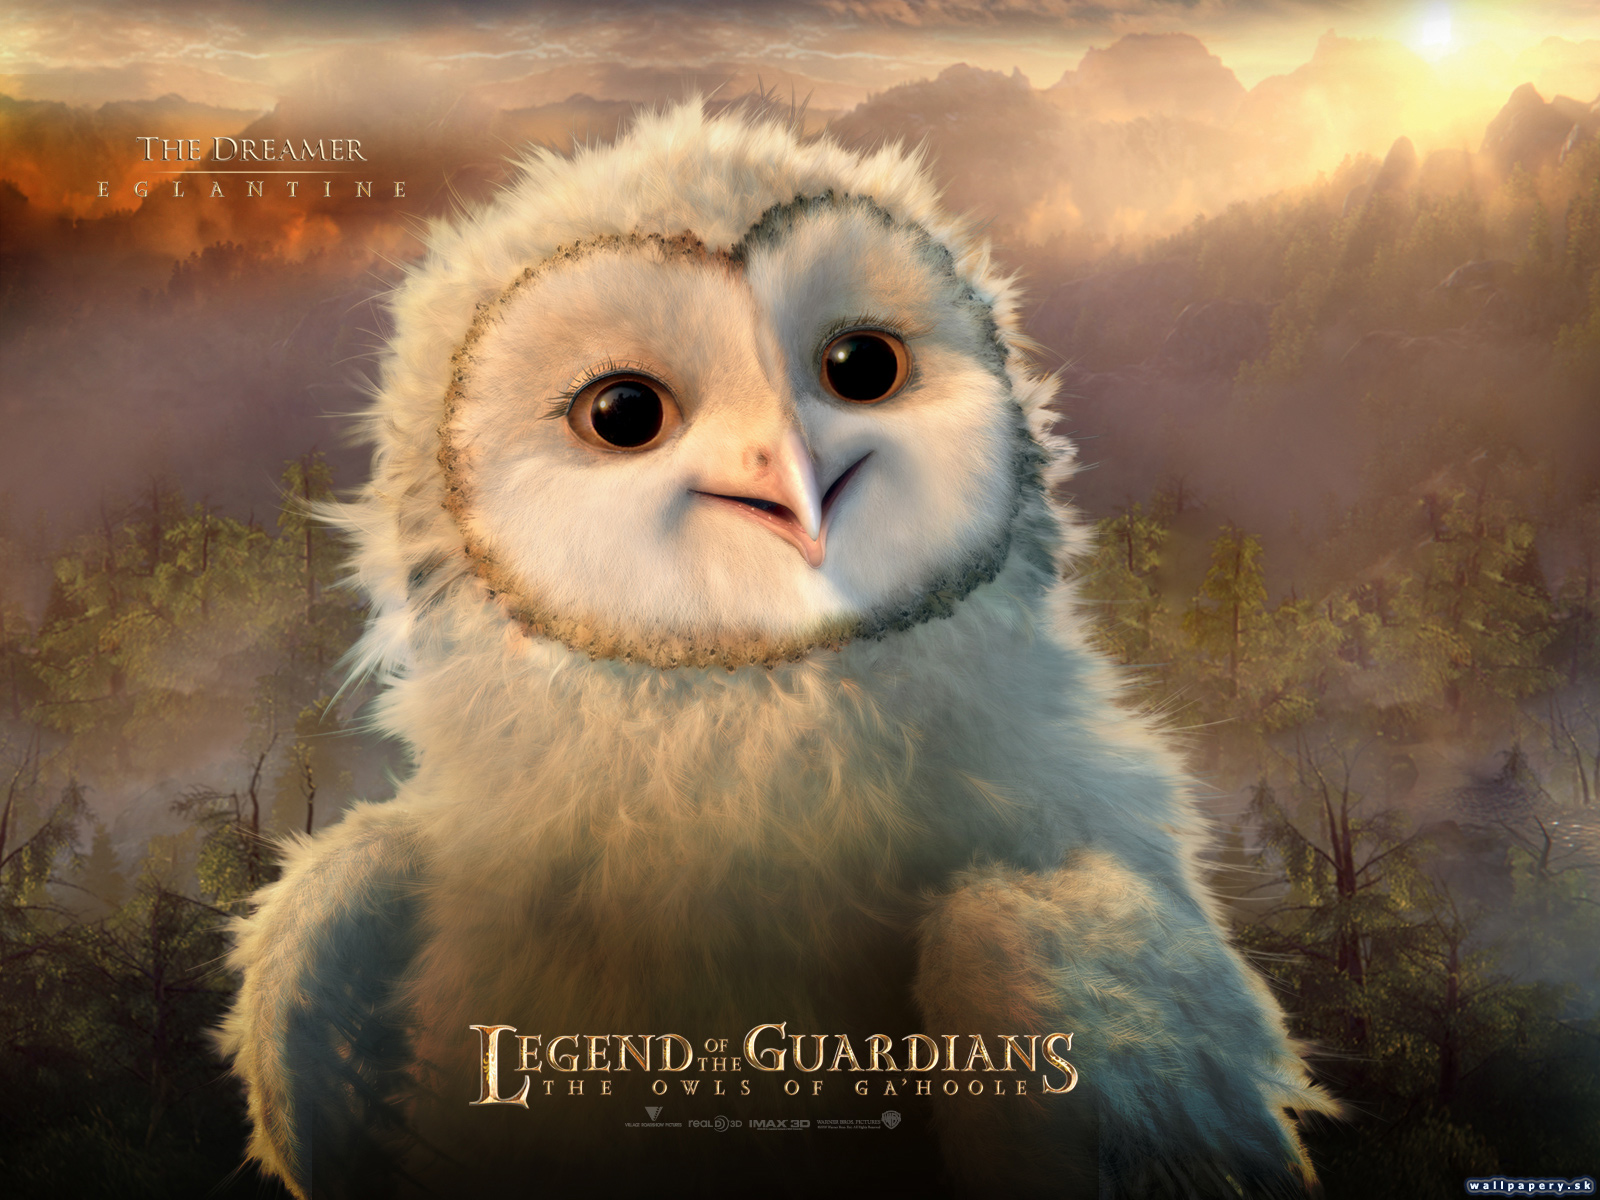 Legend of the Guardians: The Owls of Ga'Hoole - wallpaper 2